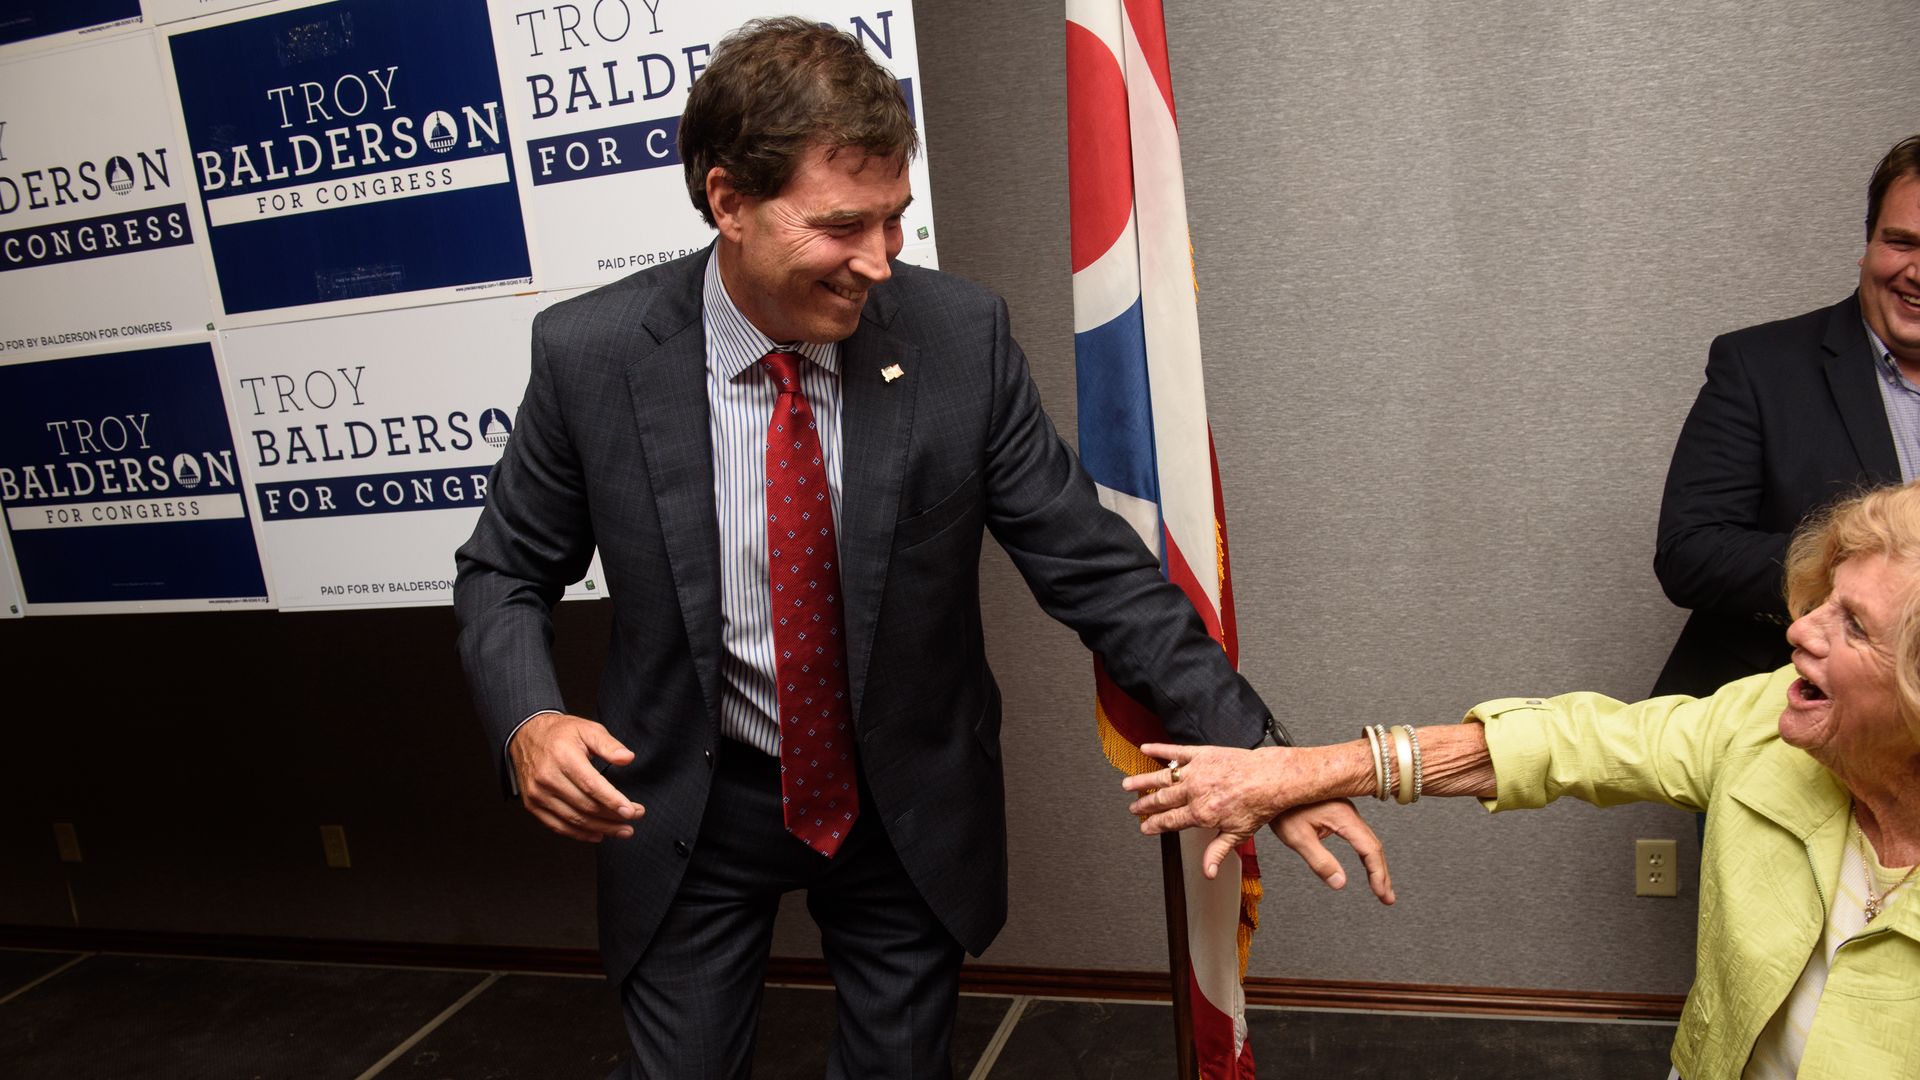 Republican Troy Balderson stepping down off a platform after giving a speech and smiling at a member in the crowd who is reaching out a hand toward him